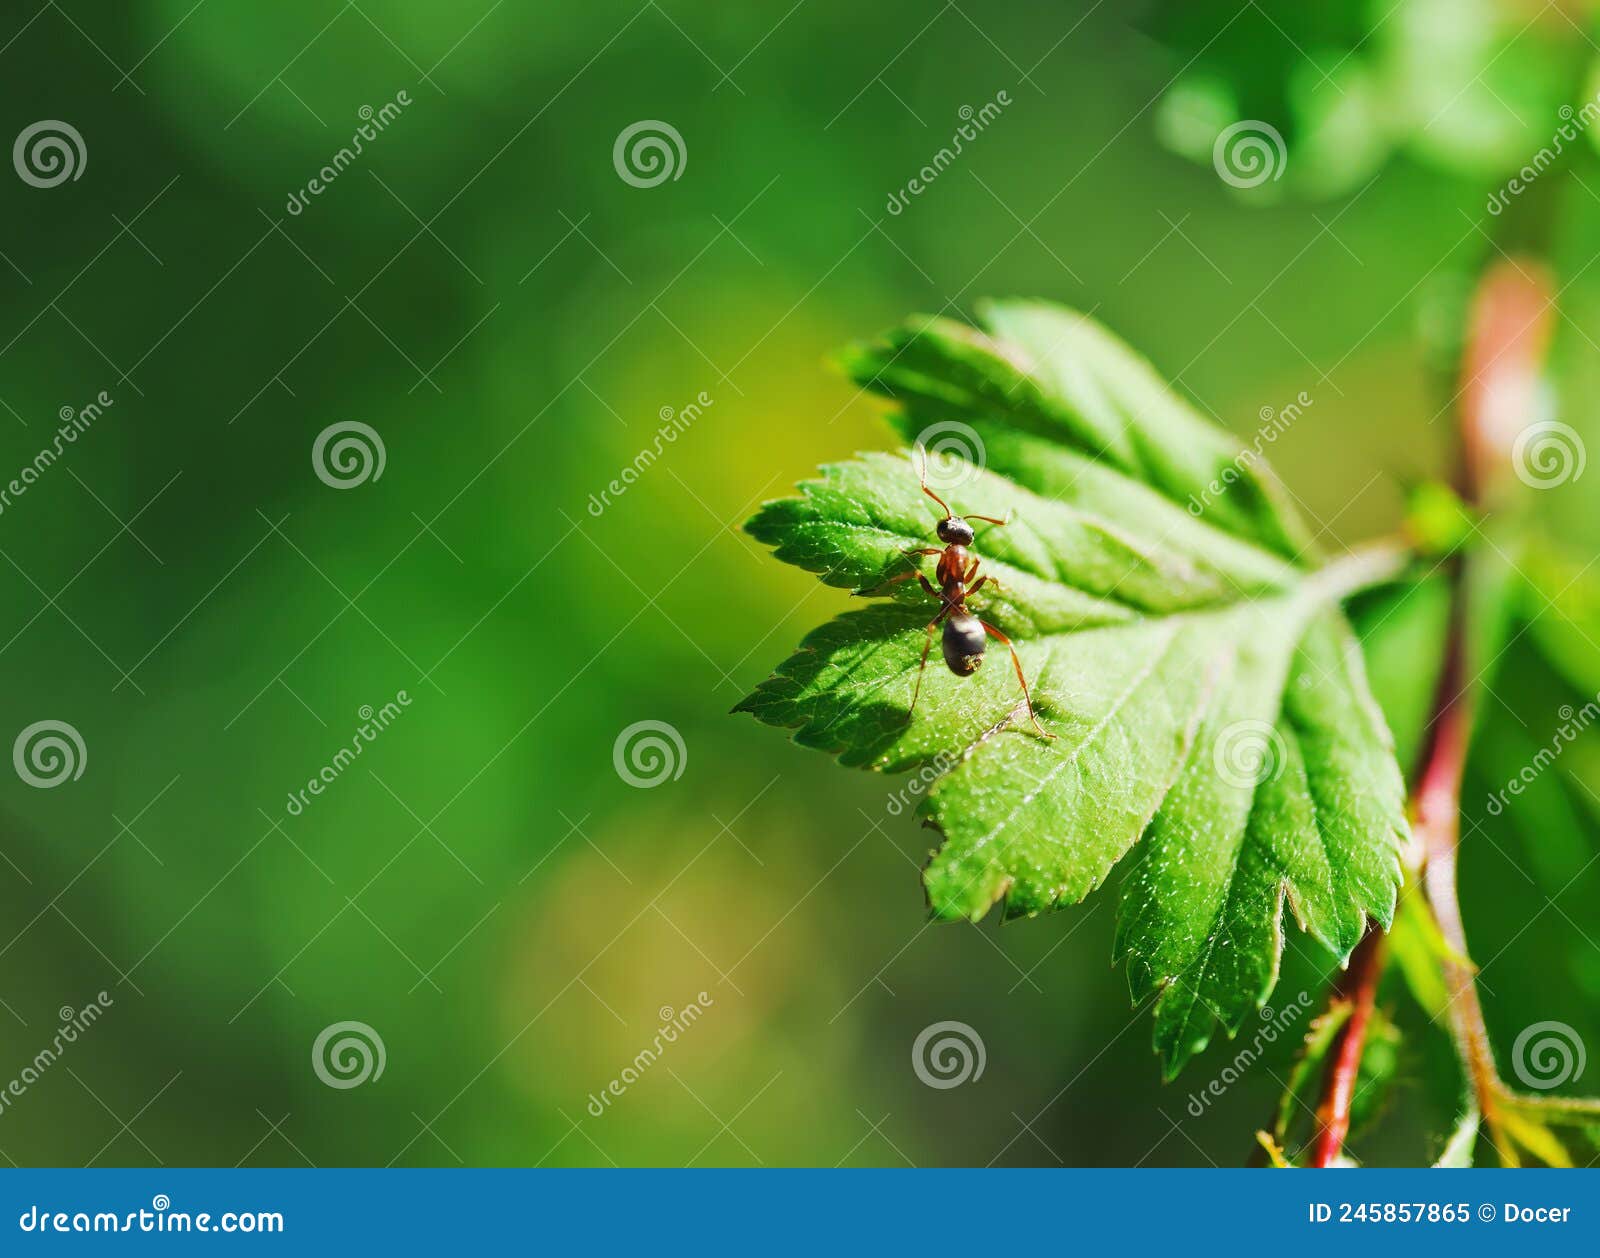 one small ants clamber on plant leaf. macro photo